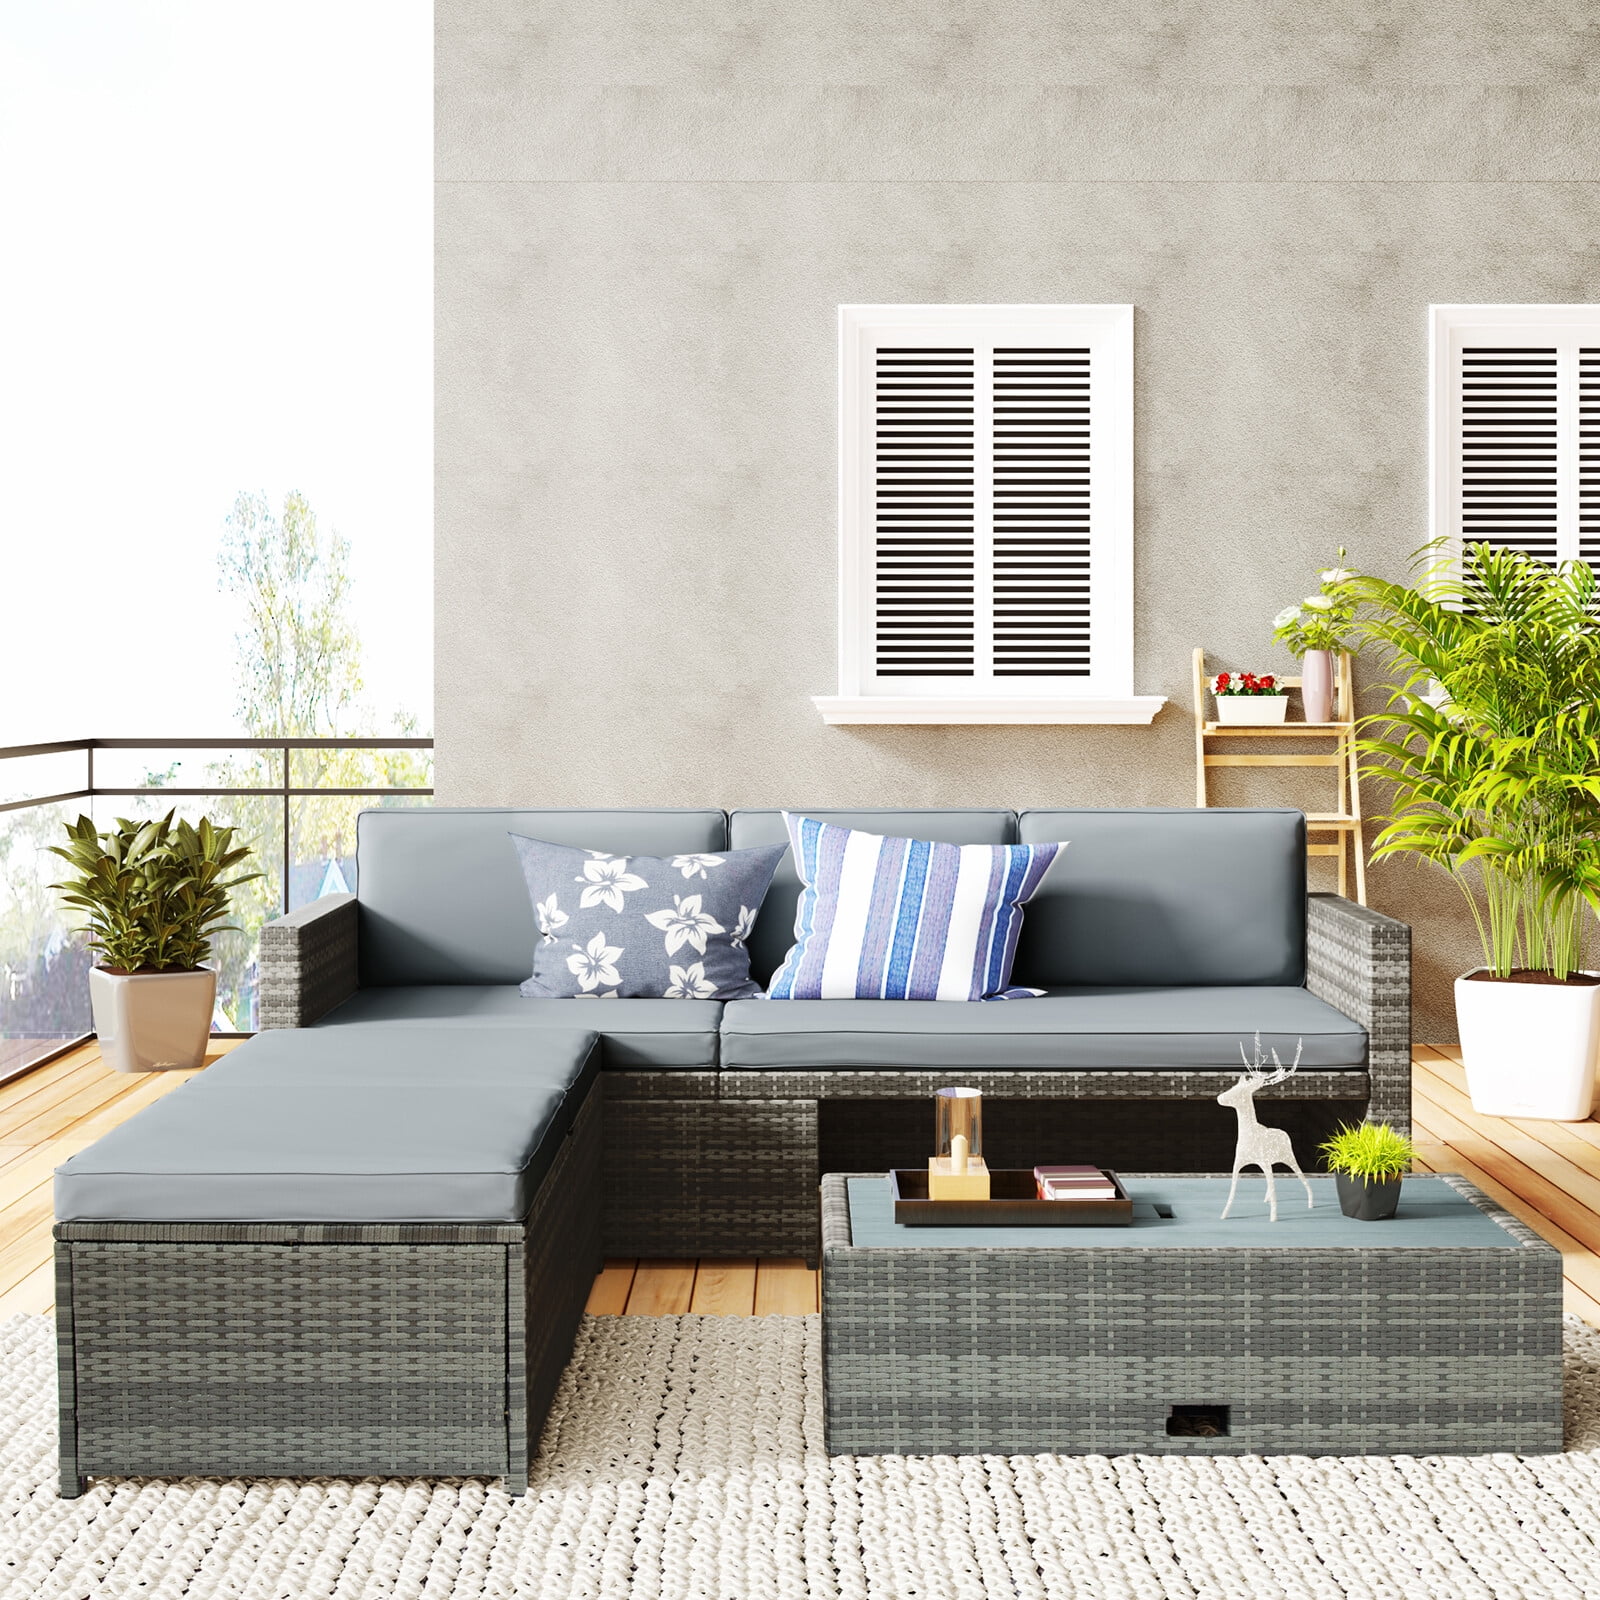 OVERDRIVE 4 Outdoor Patio Furniture Set All-weather Rattan Wicker Sectional Sofa Sets with Retractable Table Backyard Gray - Walmart.com